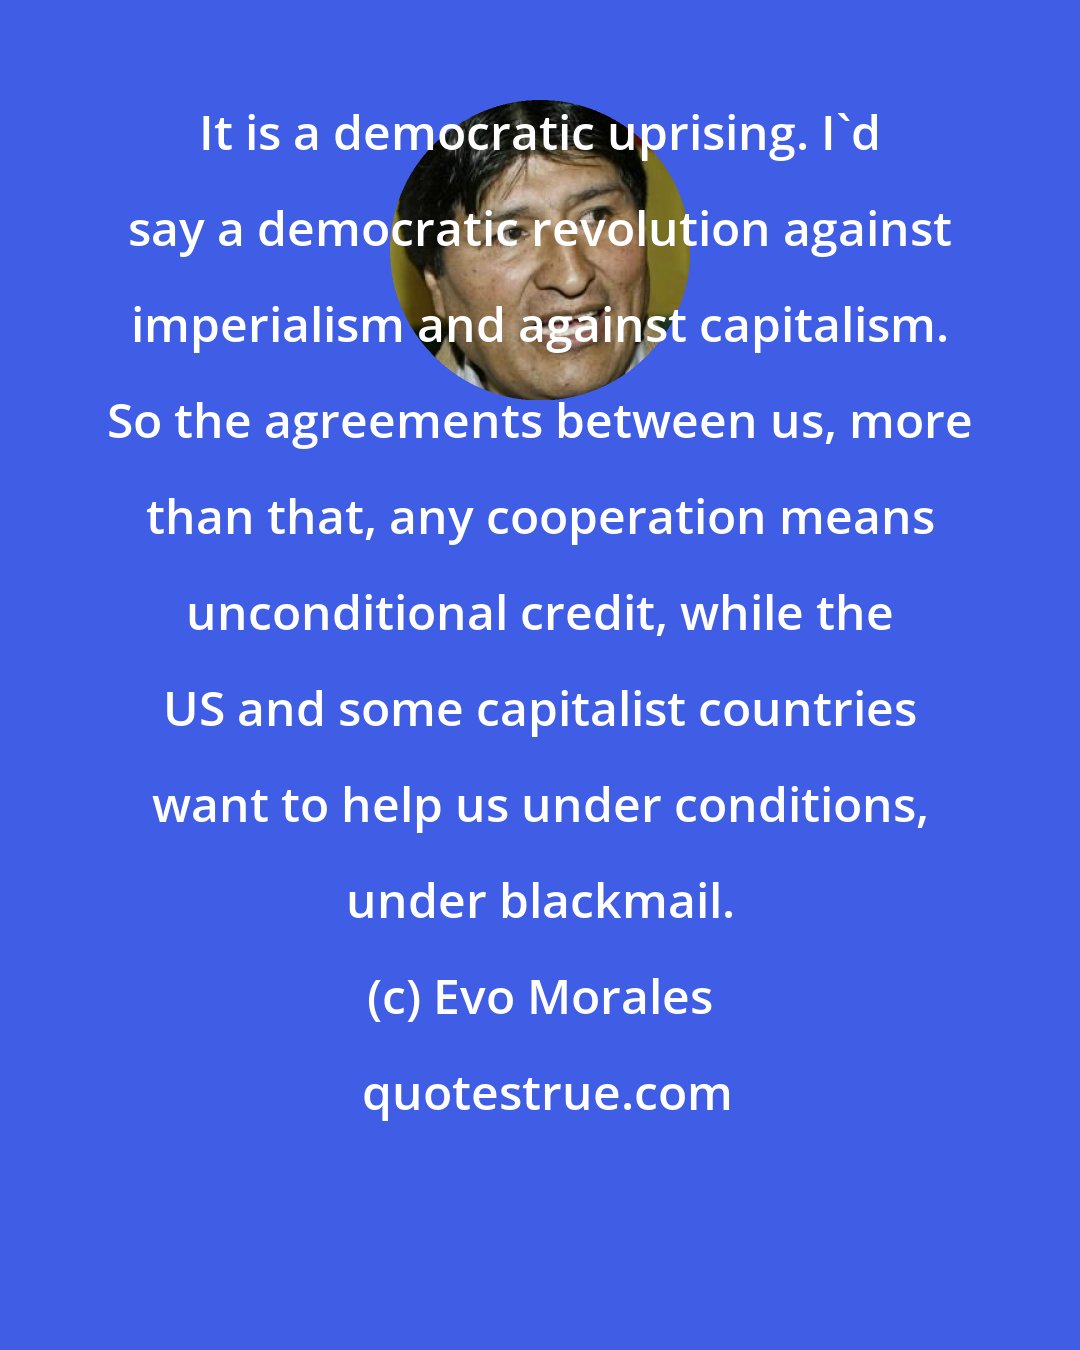 Evo Morales: It is a democratic uprising. I'd say a democratic revolution against imperialism and against capitalism. So the agreements between us, more than that, any cooperation means unconditional credit, while the US and some capitalist countries want to help us under conditions, under blackmail.